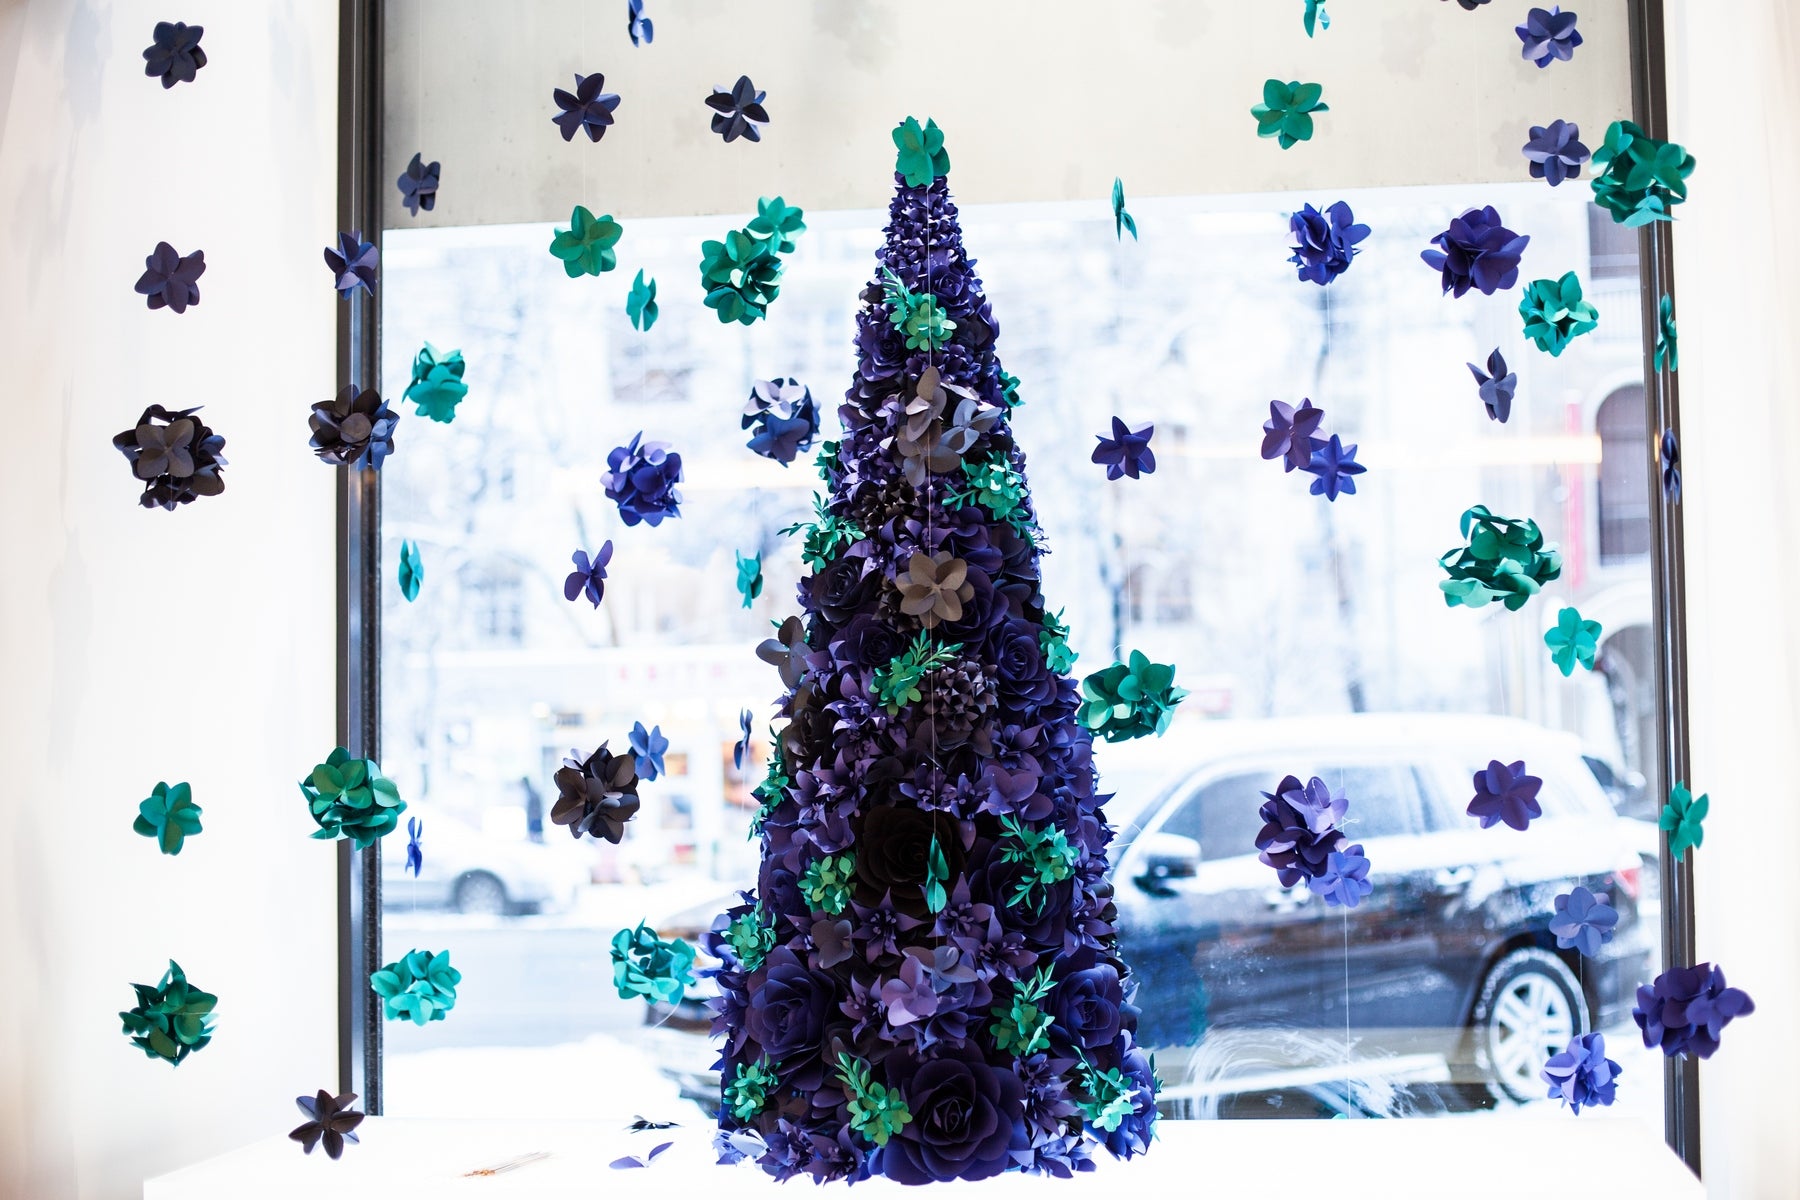 Stunning paper flower Christmas tree with a vibrant color palette of ultramarine blue and turquoise blue, complemented by hanging paper hydrangeas.